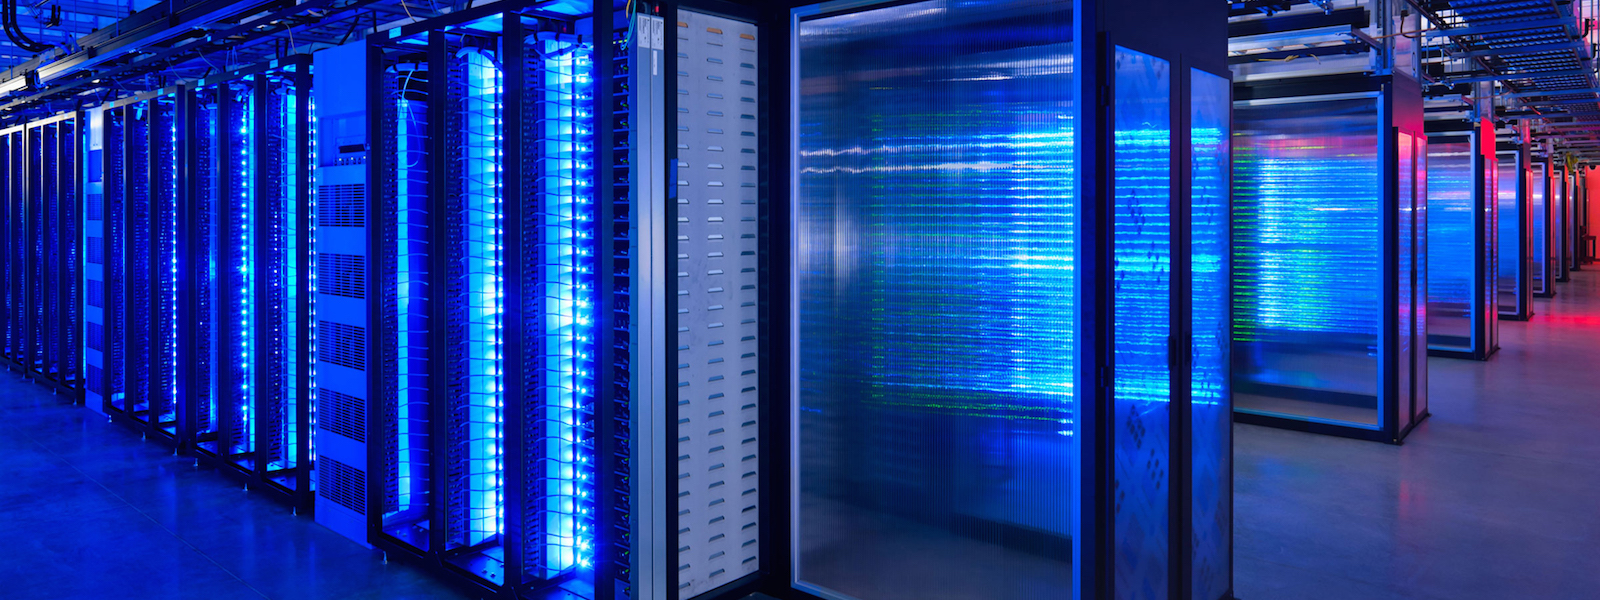 Colorful image of a data center